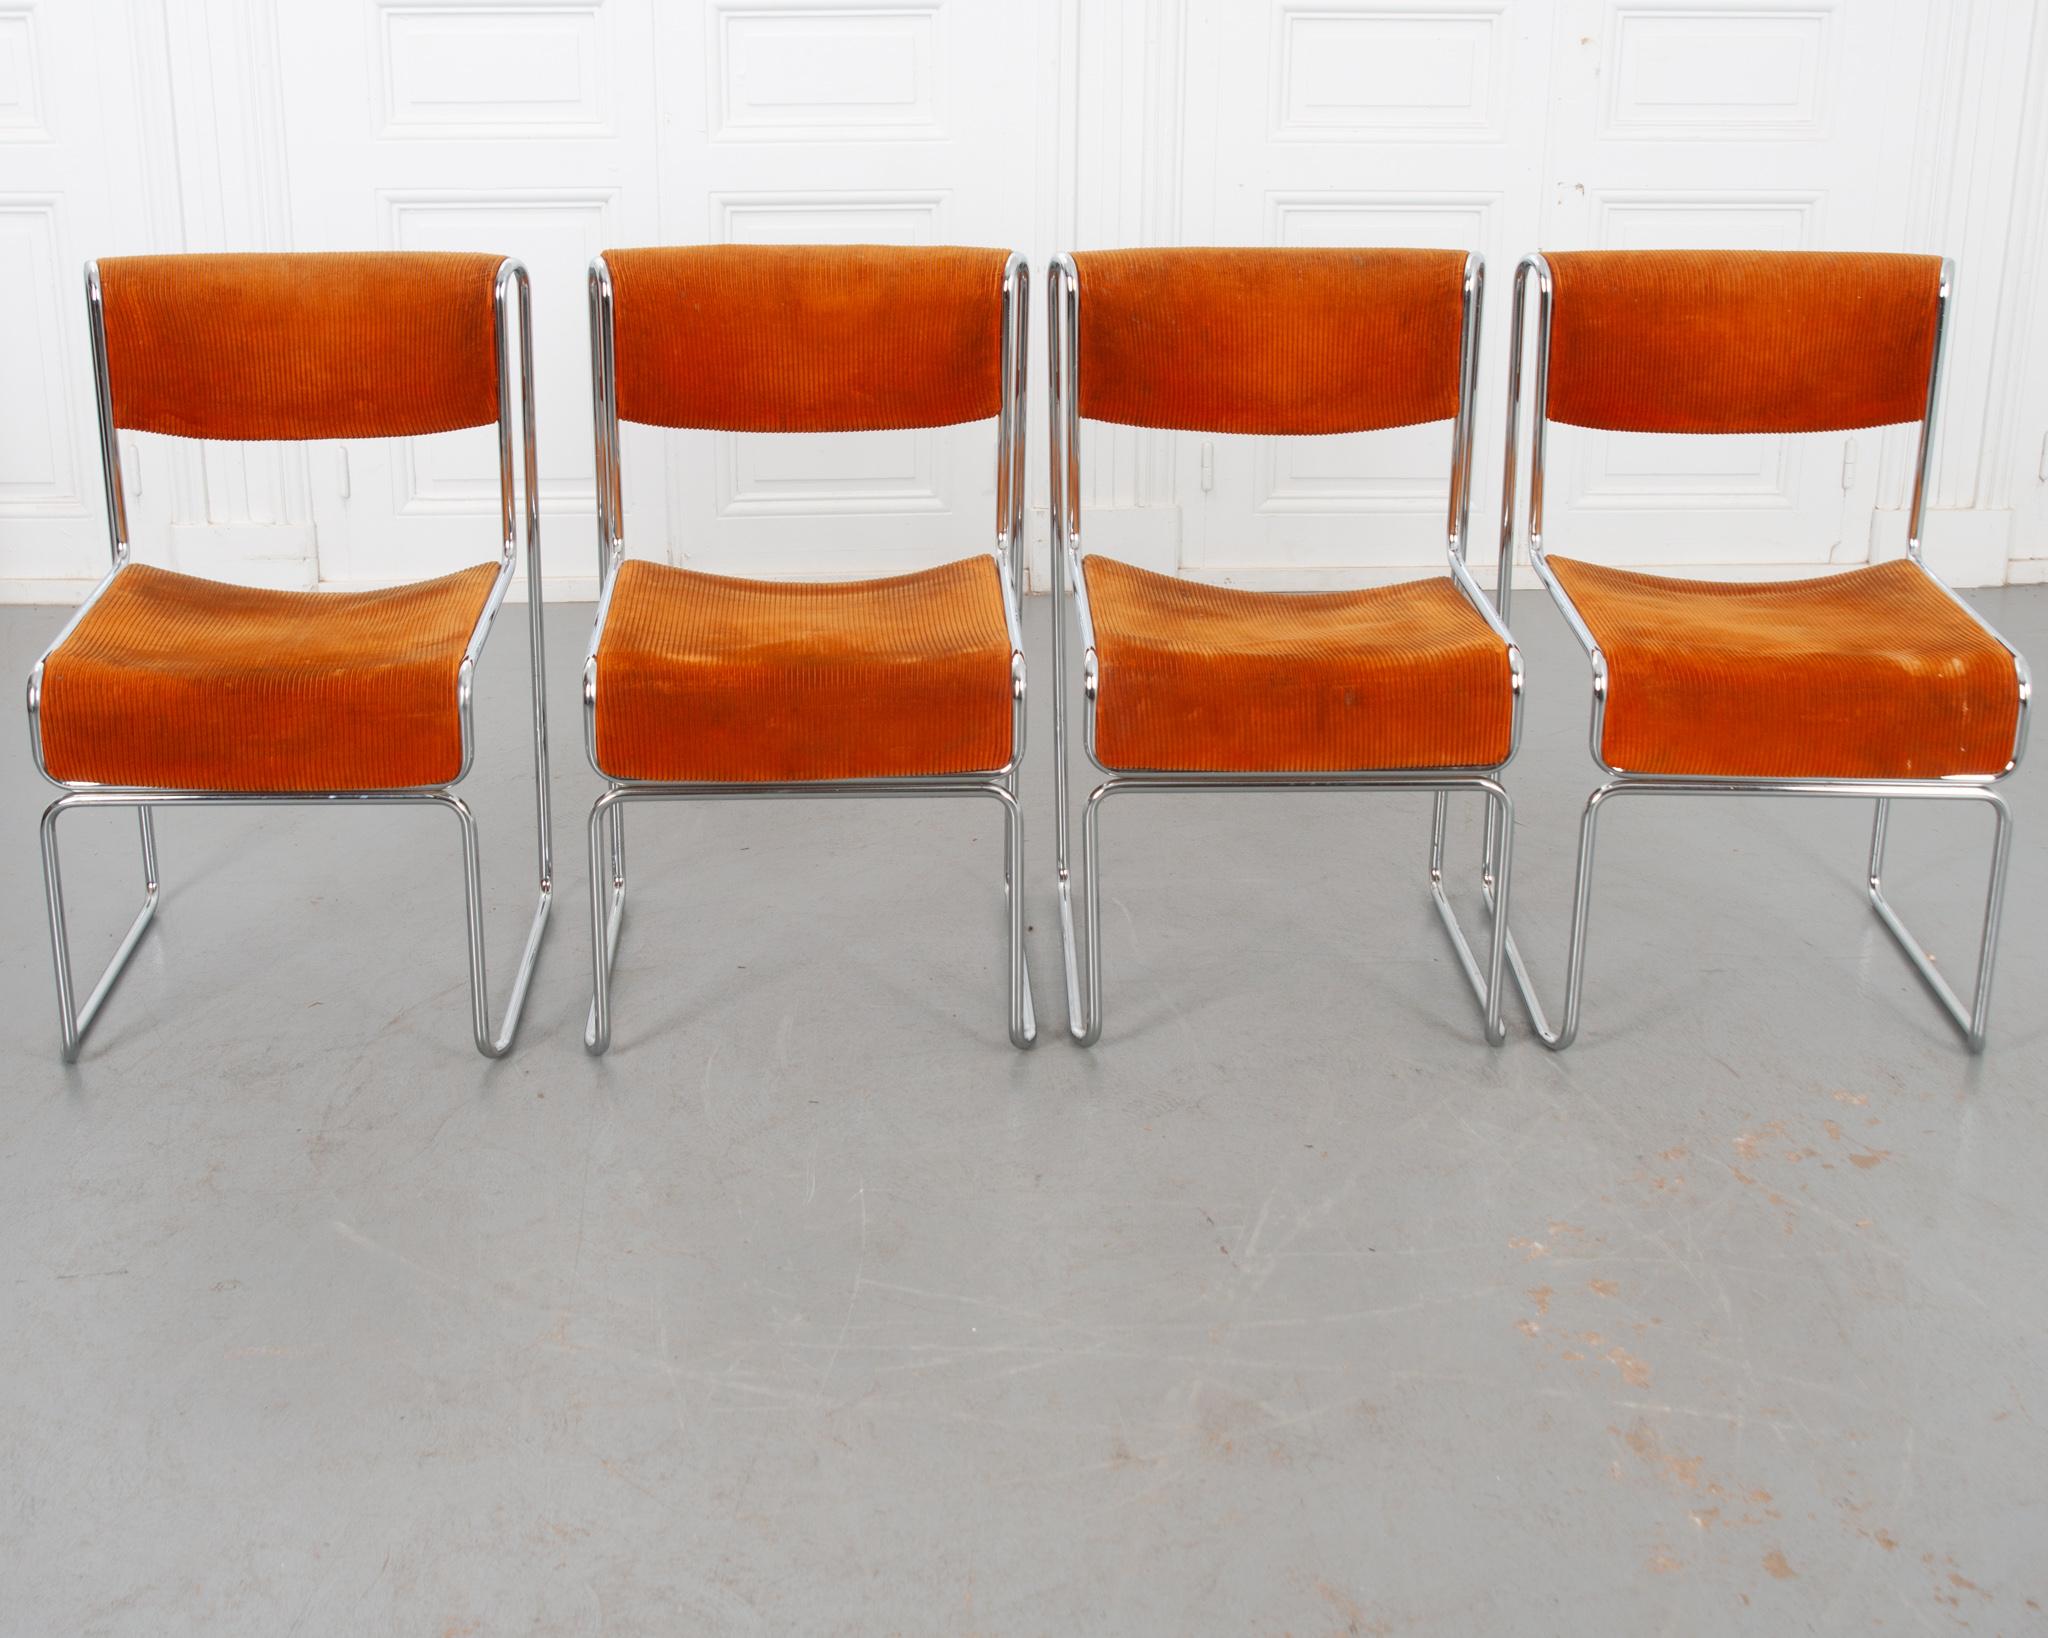 Plated Set of 4 German Mid-Century Modern Dining Chairs